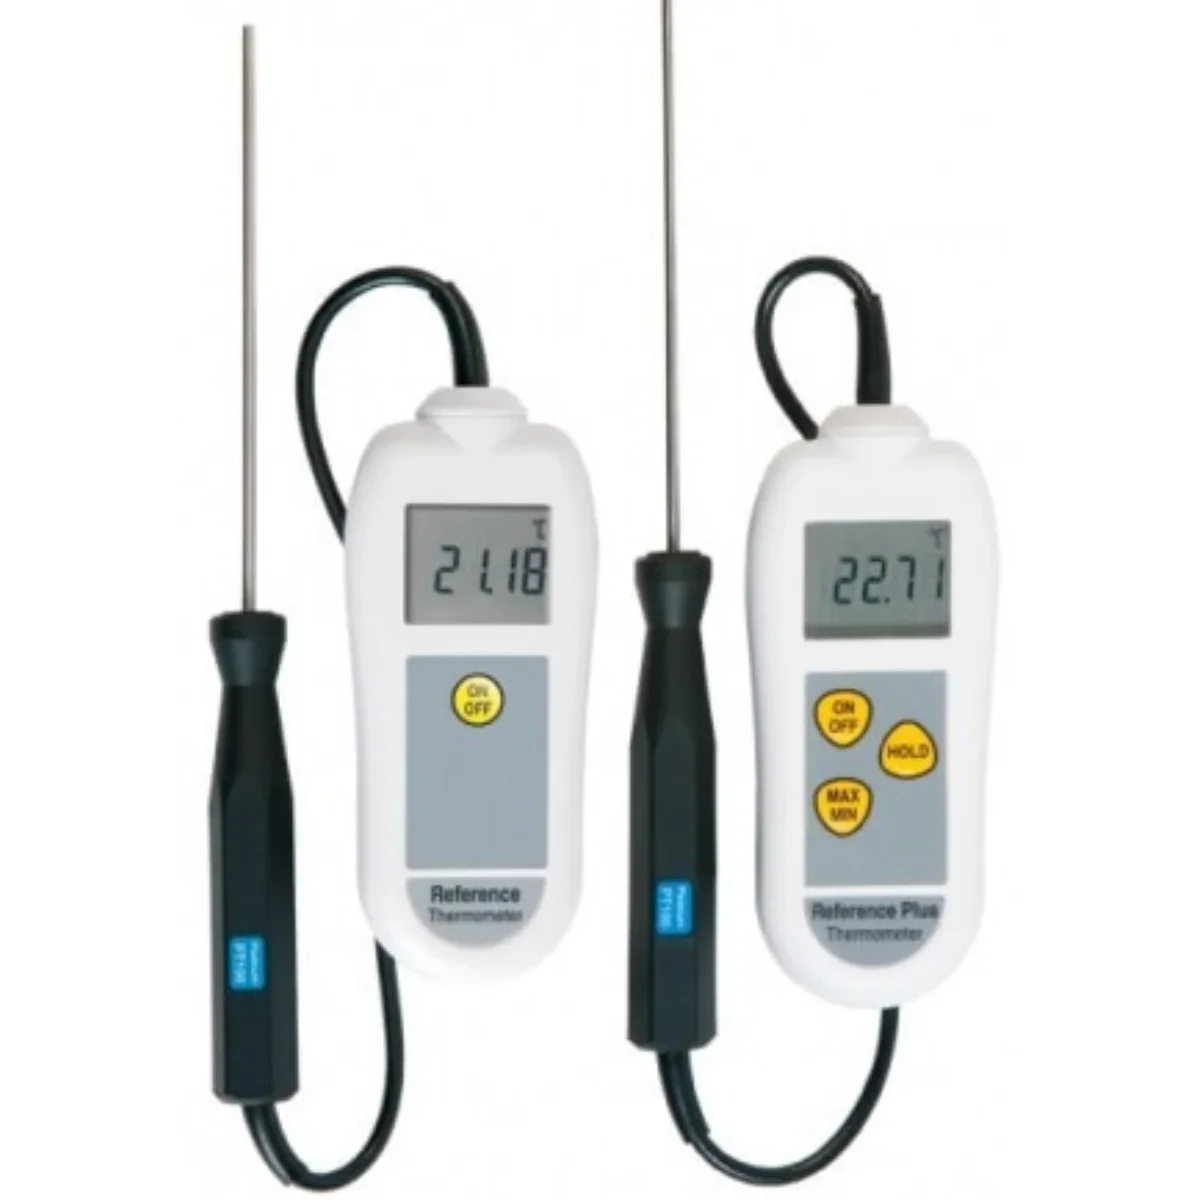 Two reference thermometers